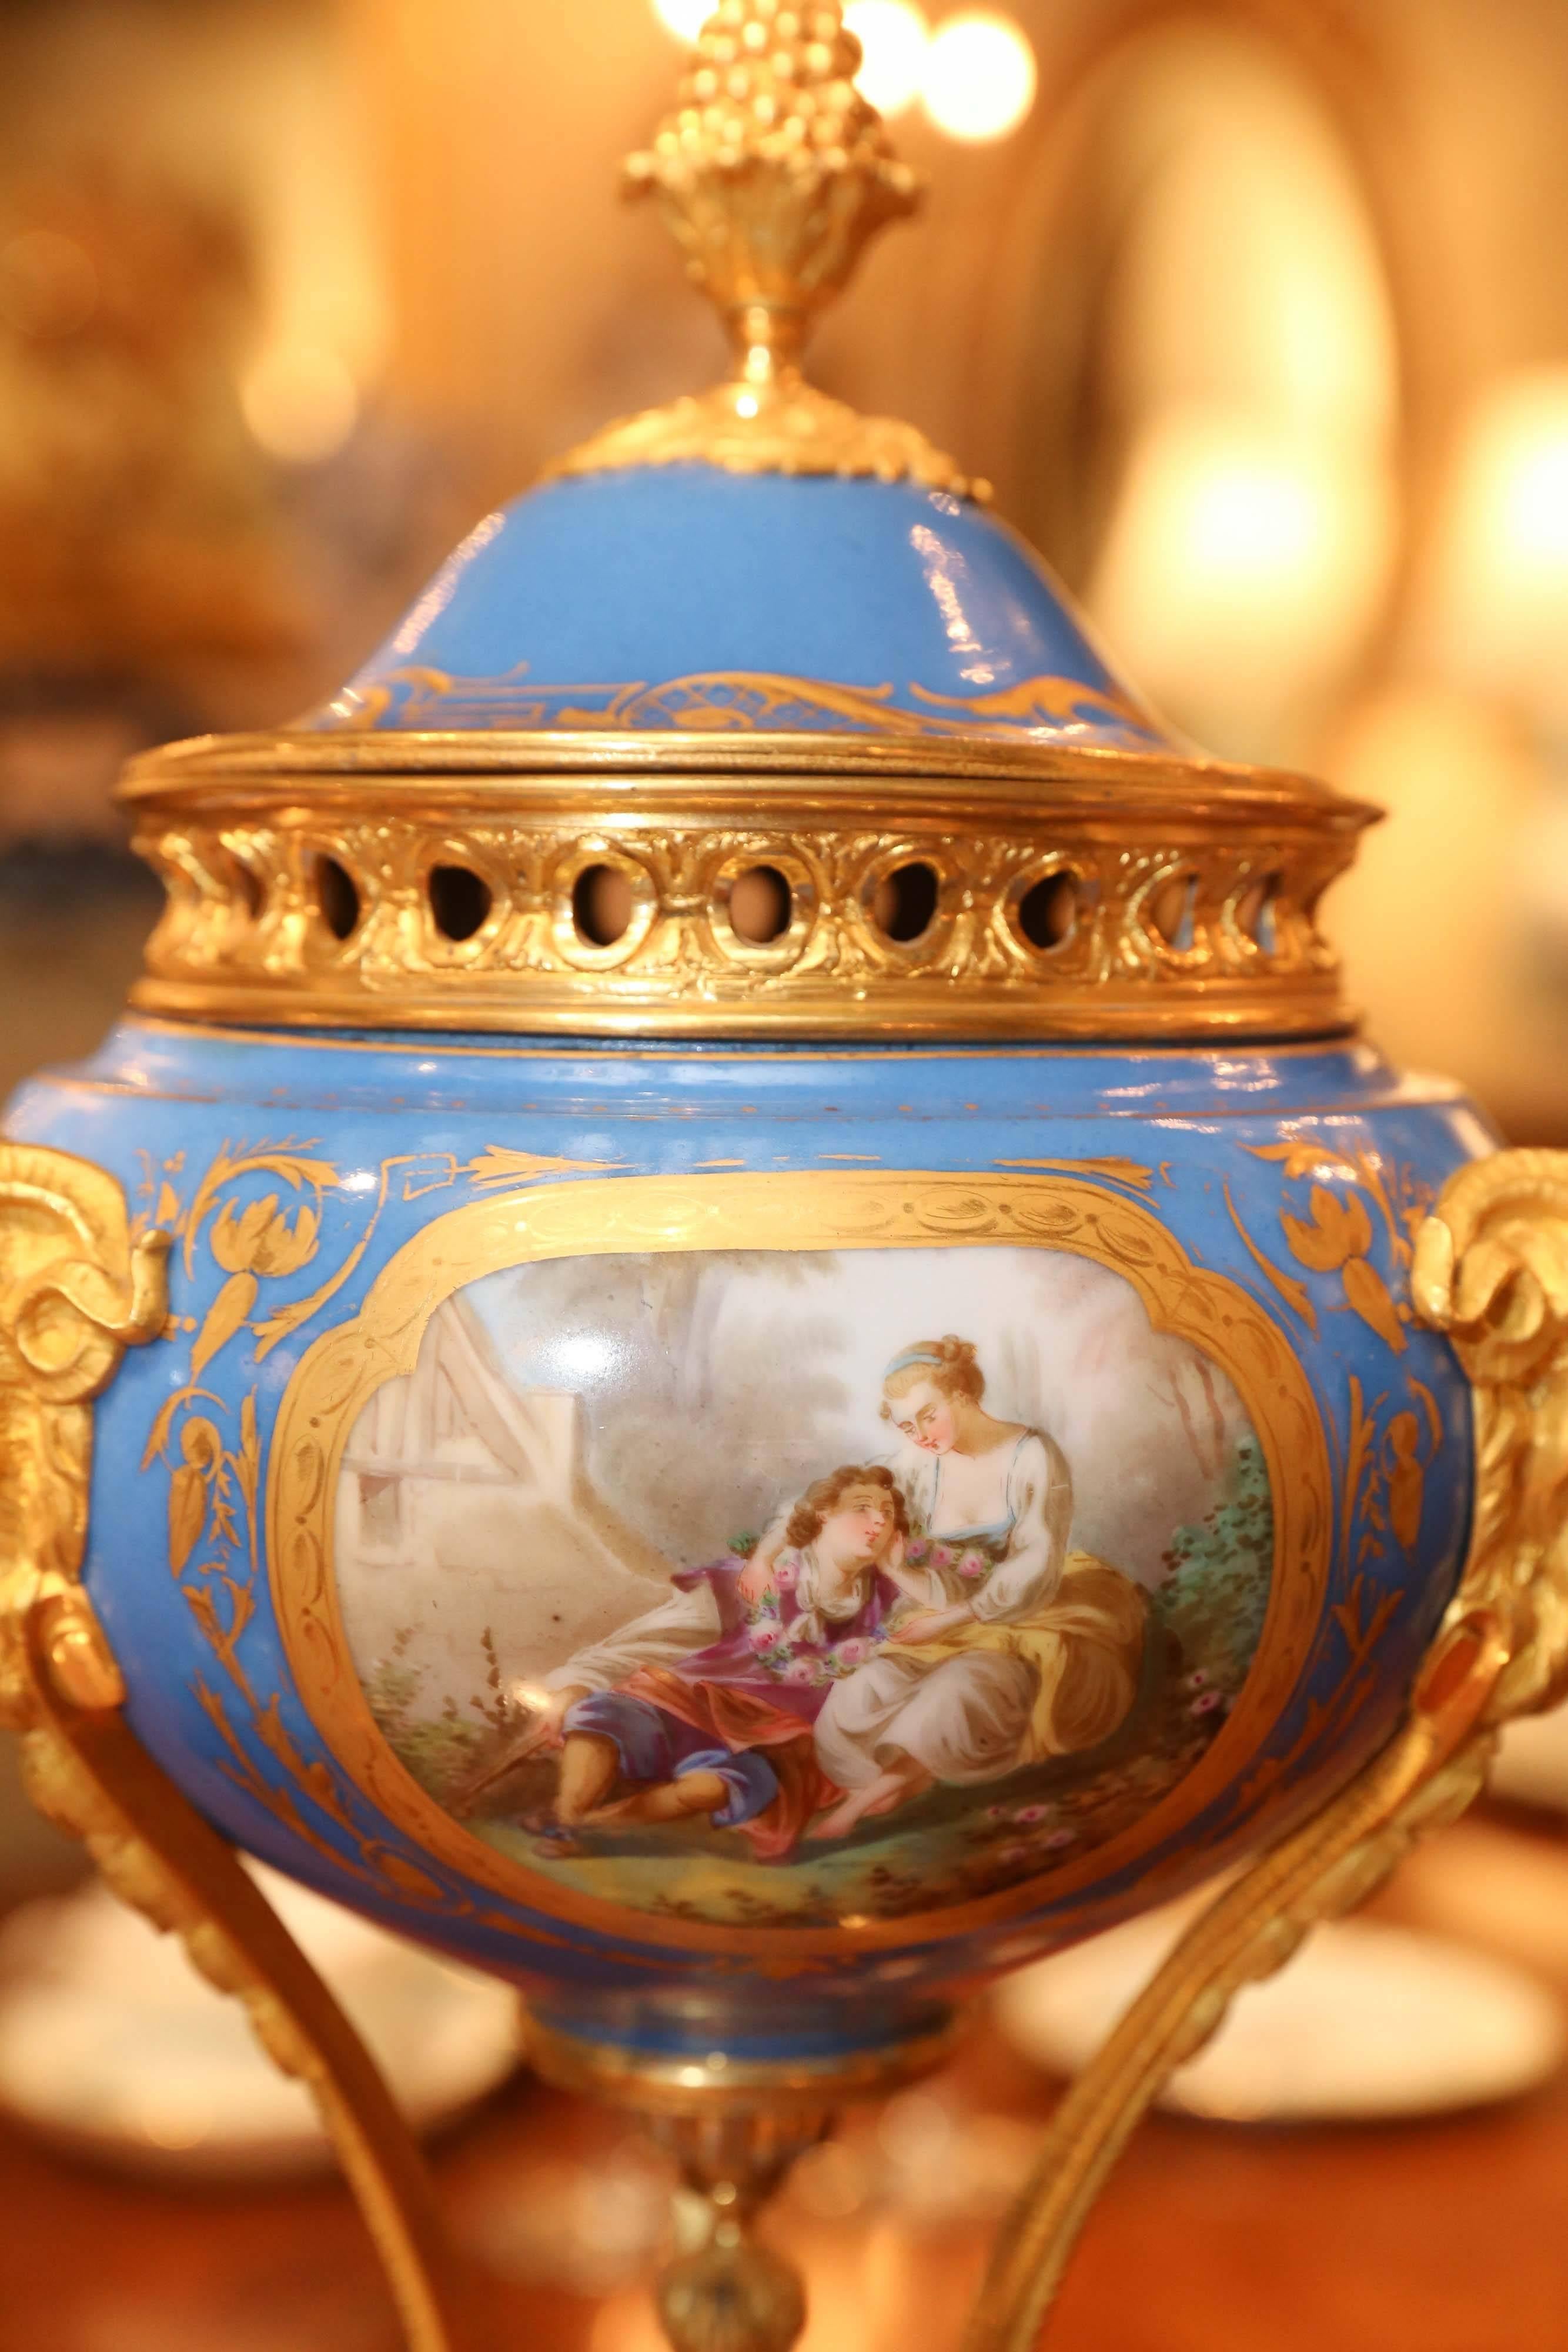 Exquisite Sèvres porcelain parfoams in celeste blue. Bronze doré mounts
that support a bowl shaped urn ending in a acorn shaped finial. 
The porcelain has reserves painted on three sides of a courting couple in a garden settings. The bronze mounts